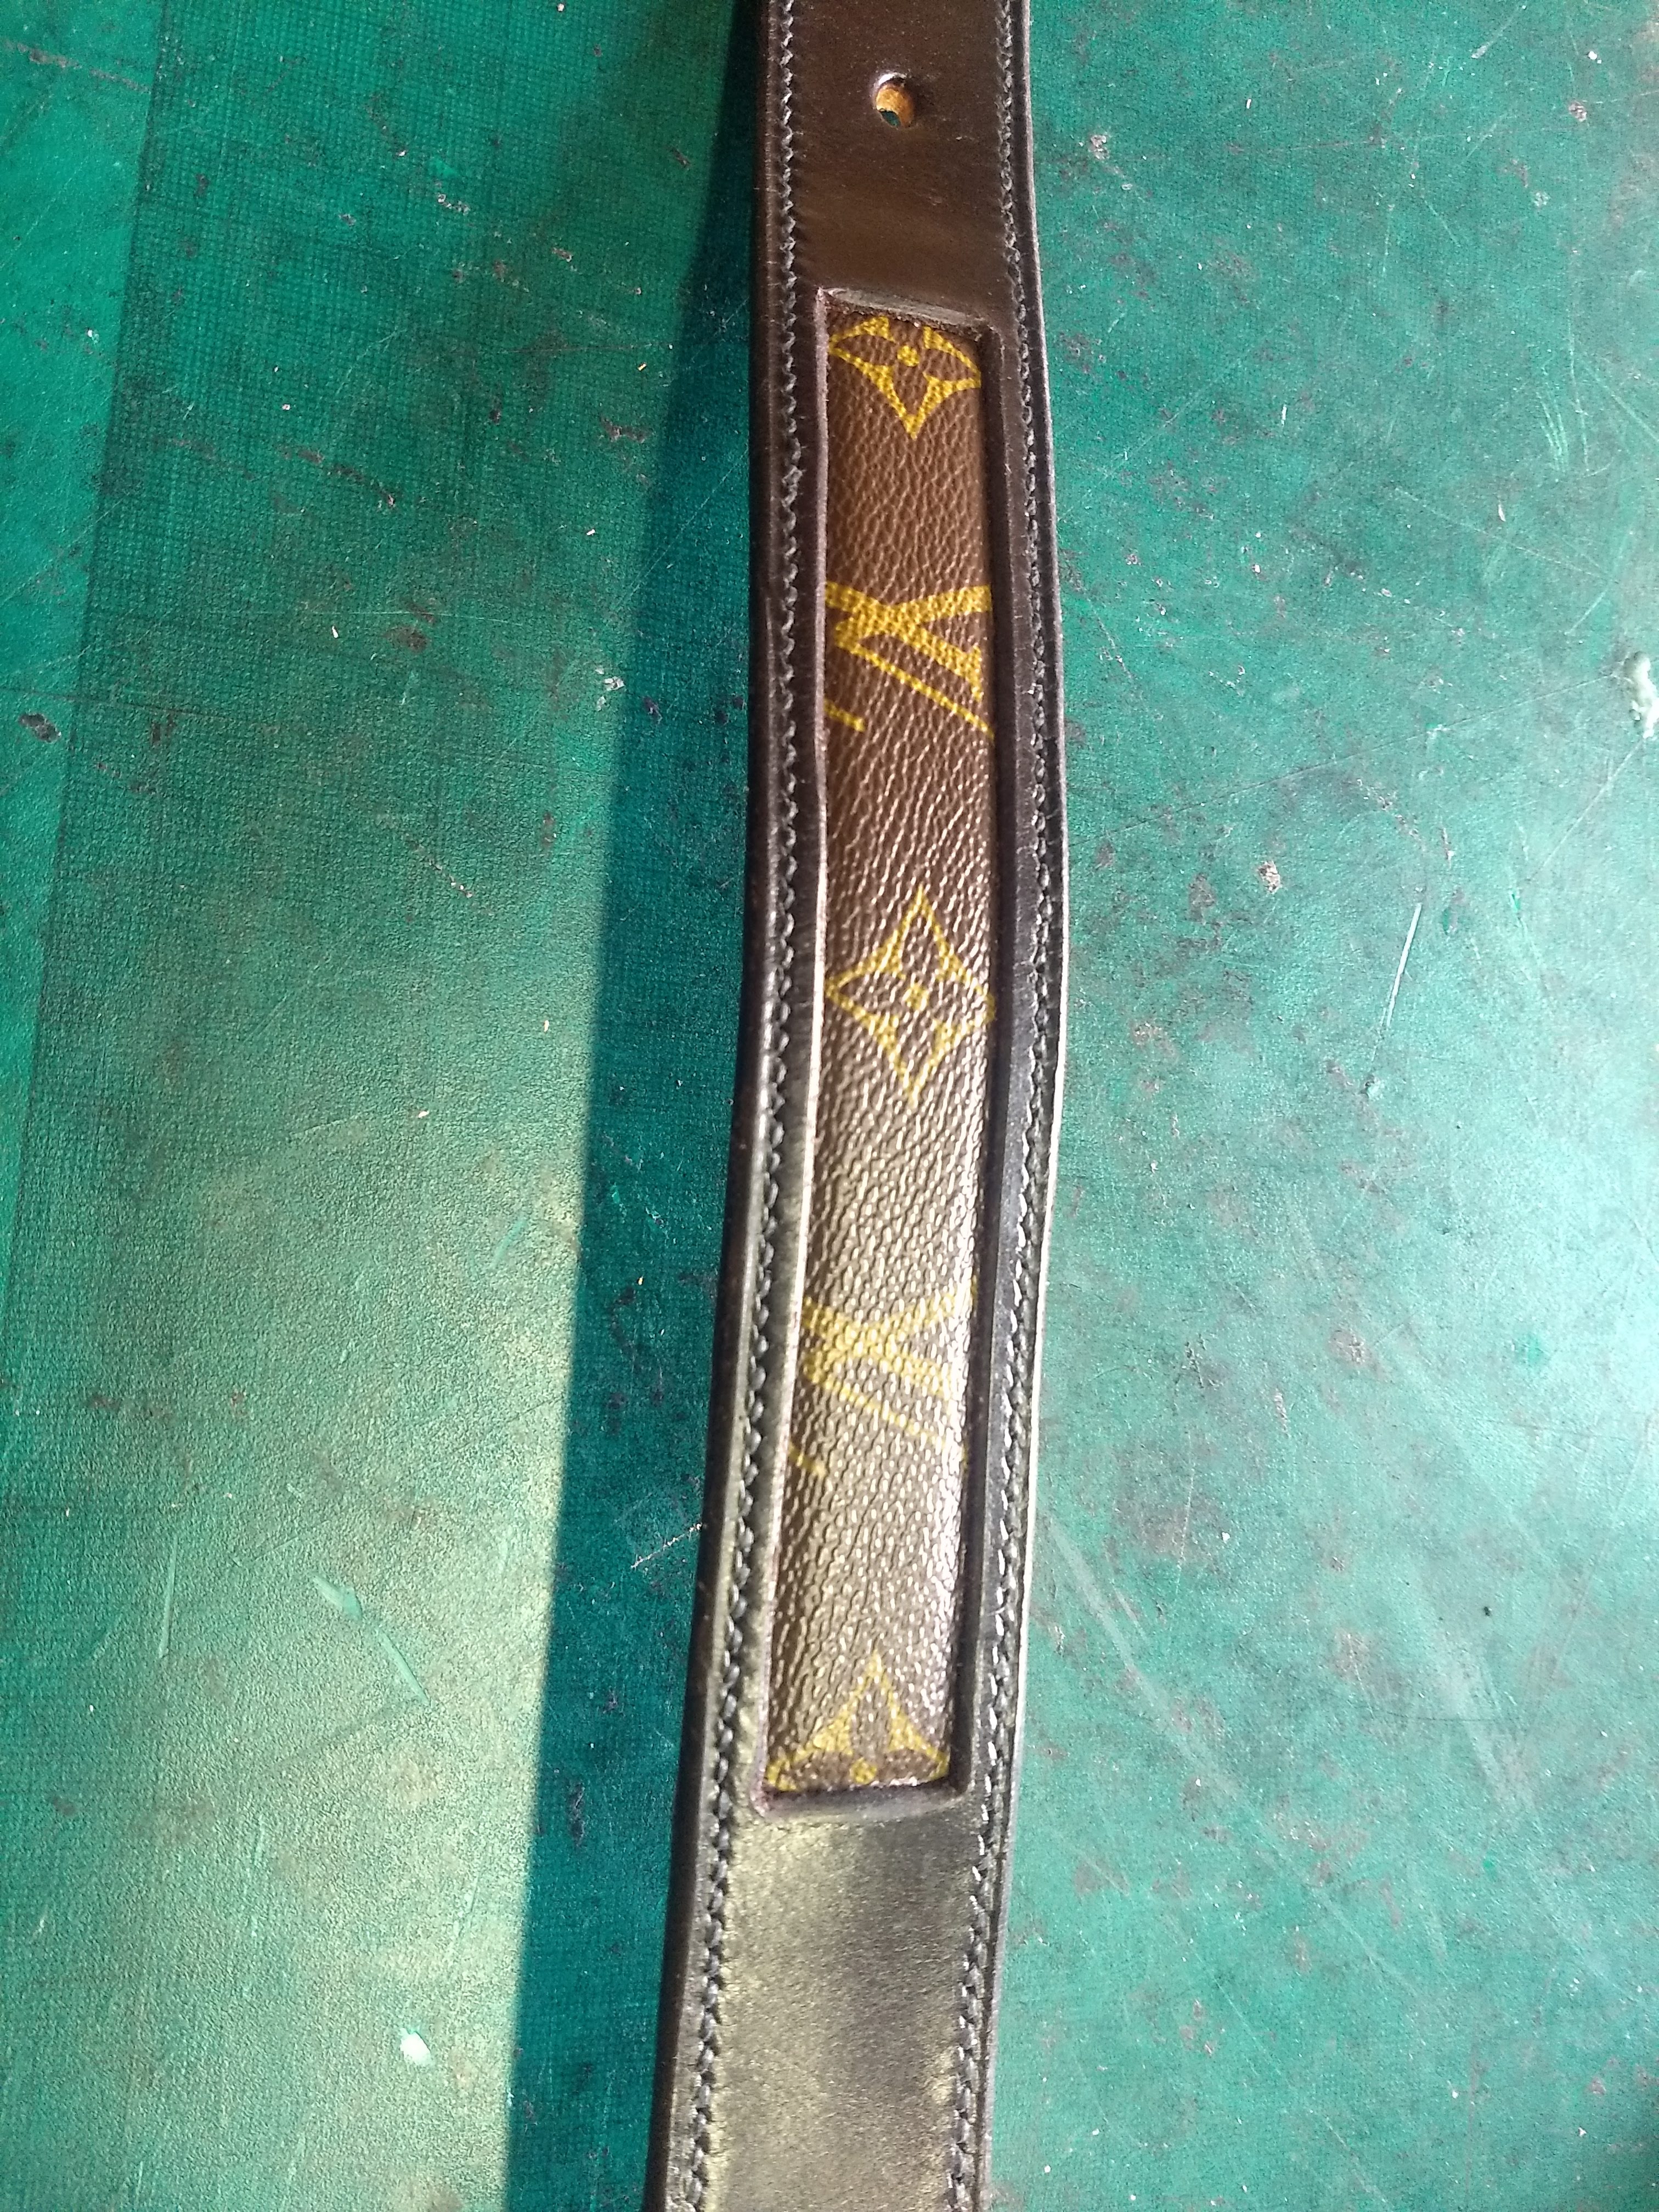 LV belt made in to a leather dog collar